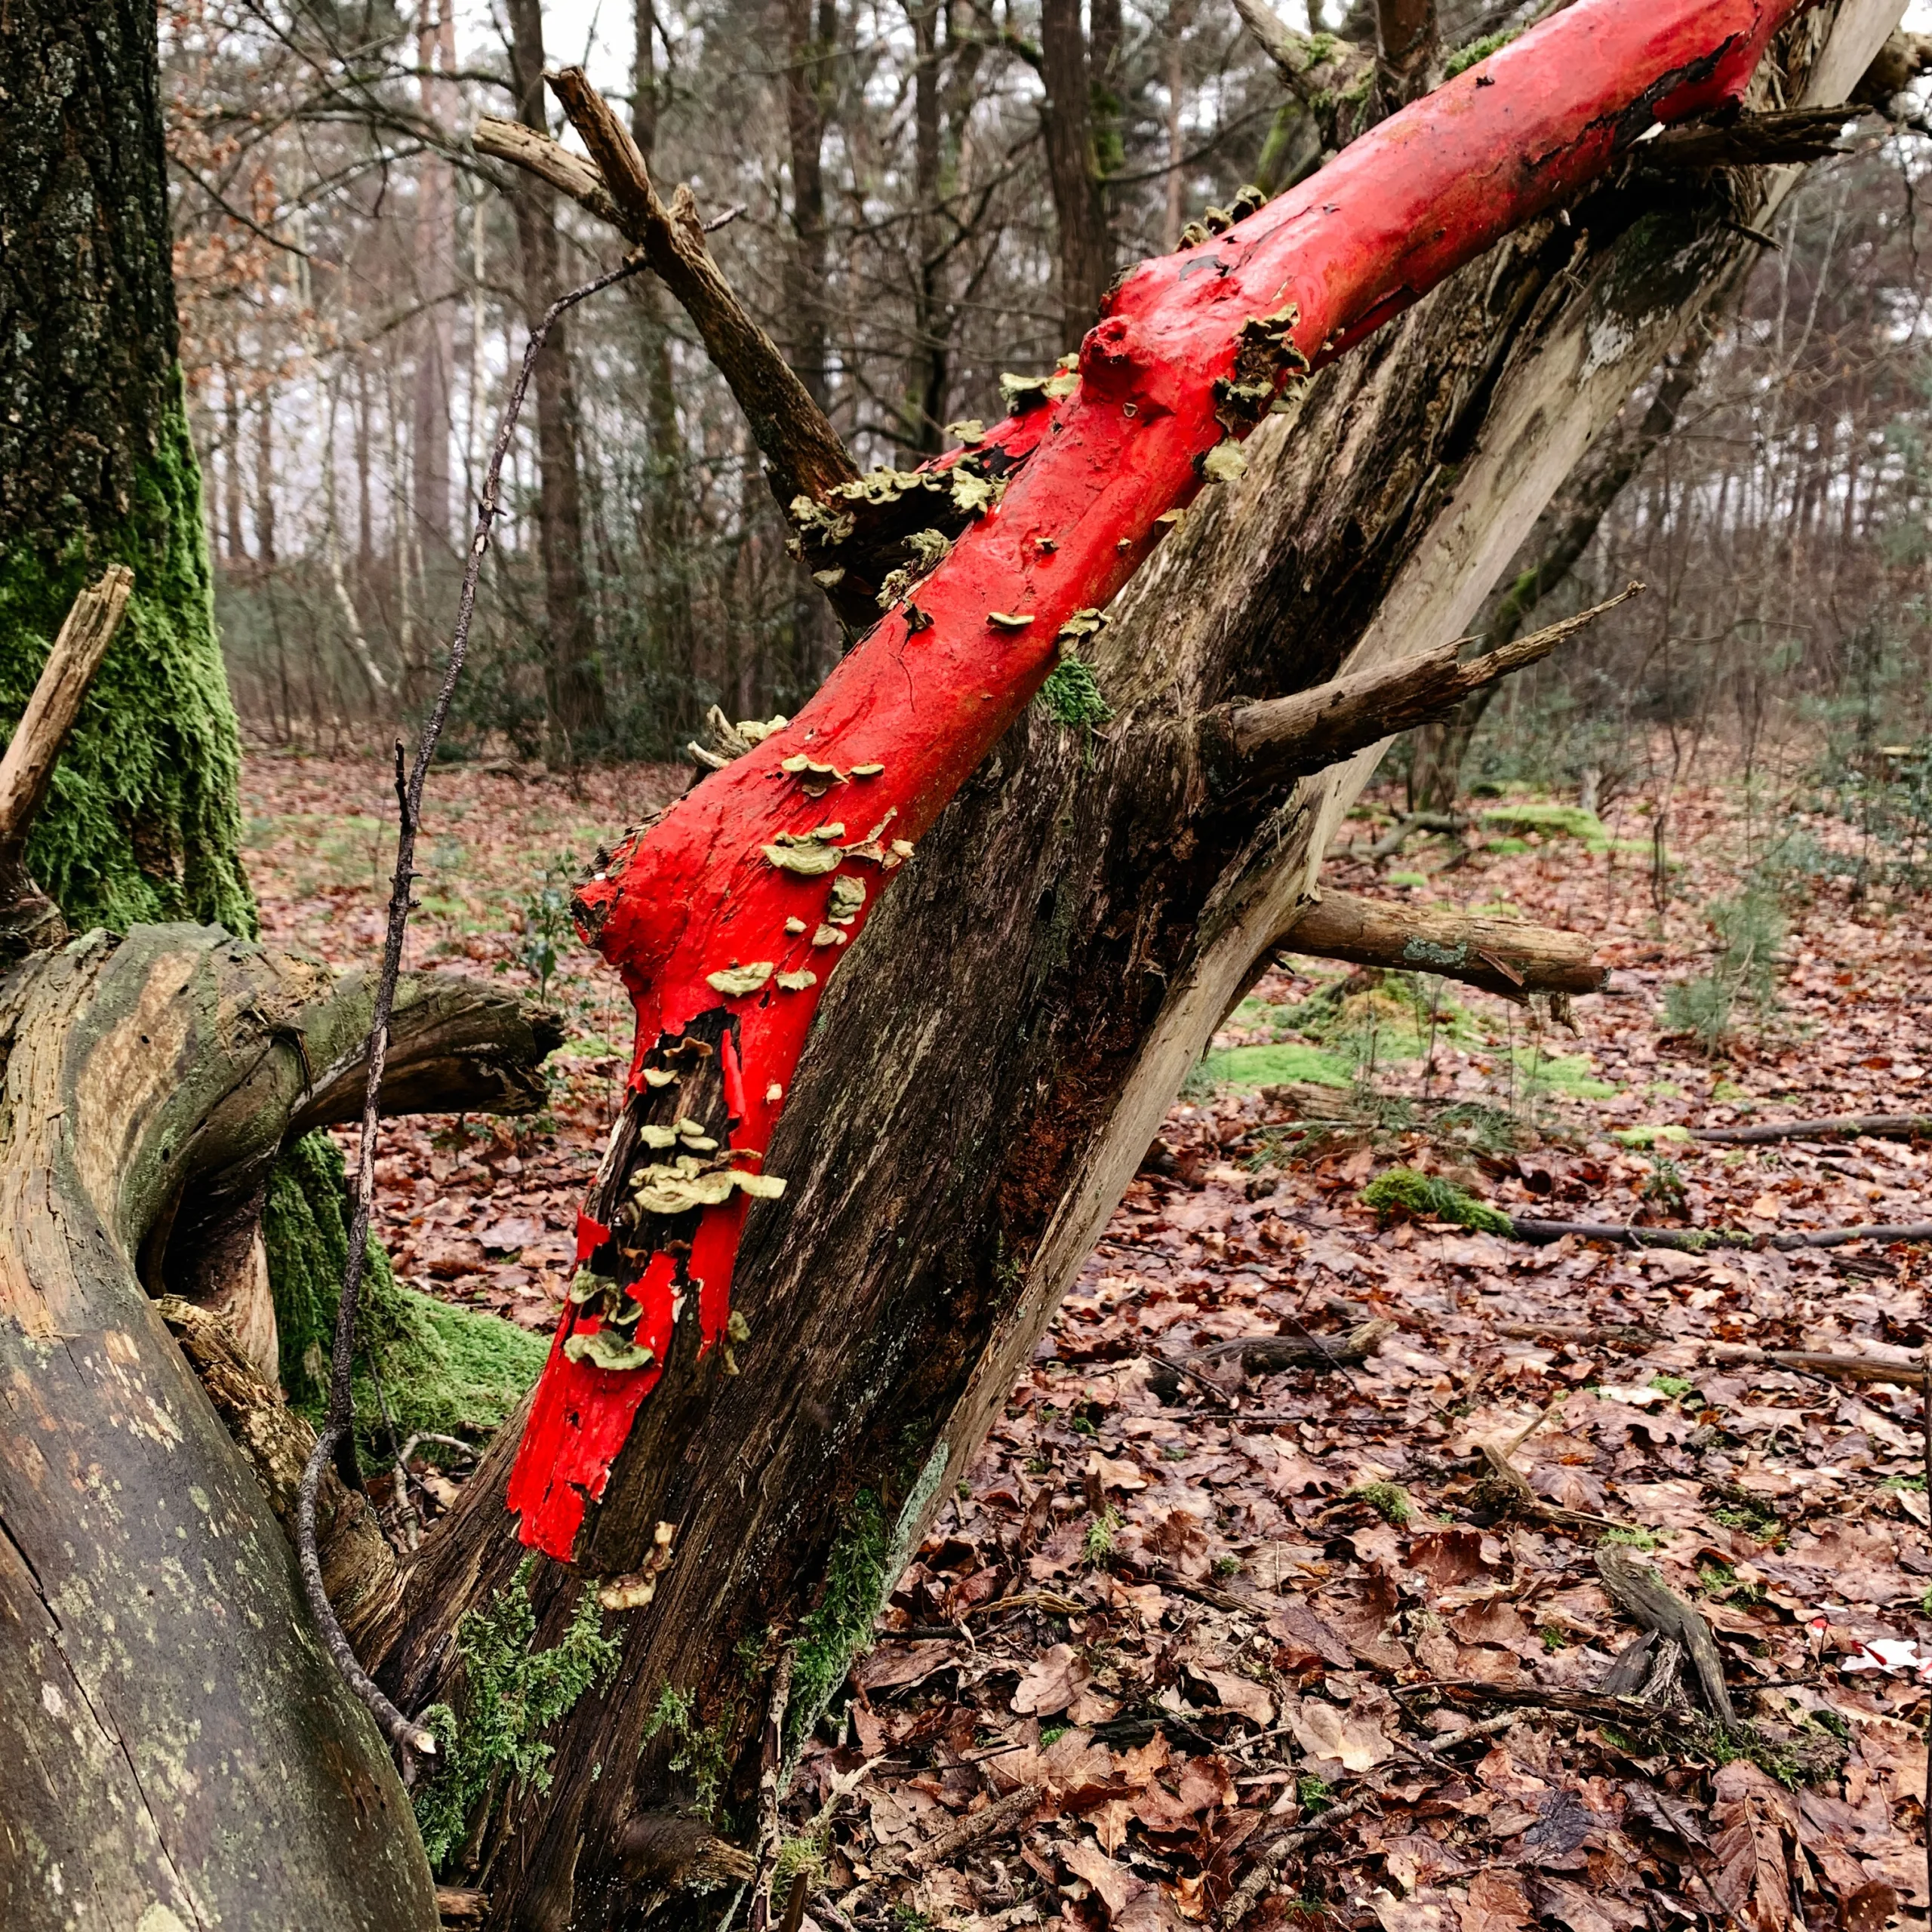 A close-up view of a fallen tree adorned with brilliant red fungi and delicate green moss, set against a leaf-strewn forest floor. The damp atmosphere adds to the enchantment.